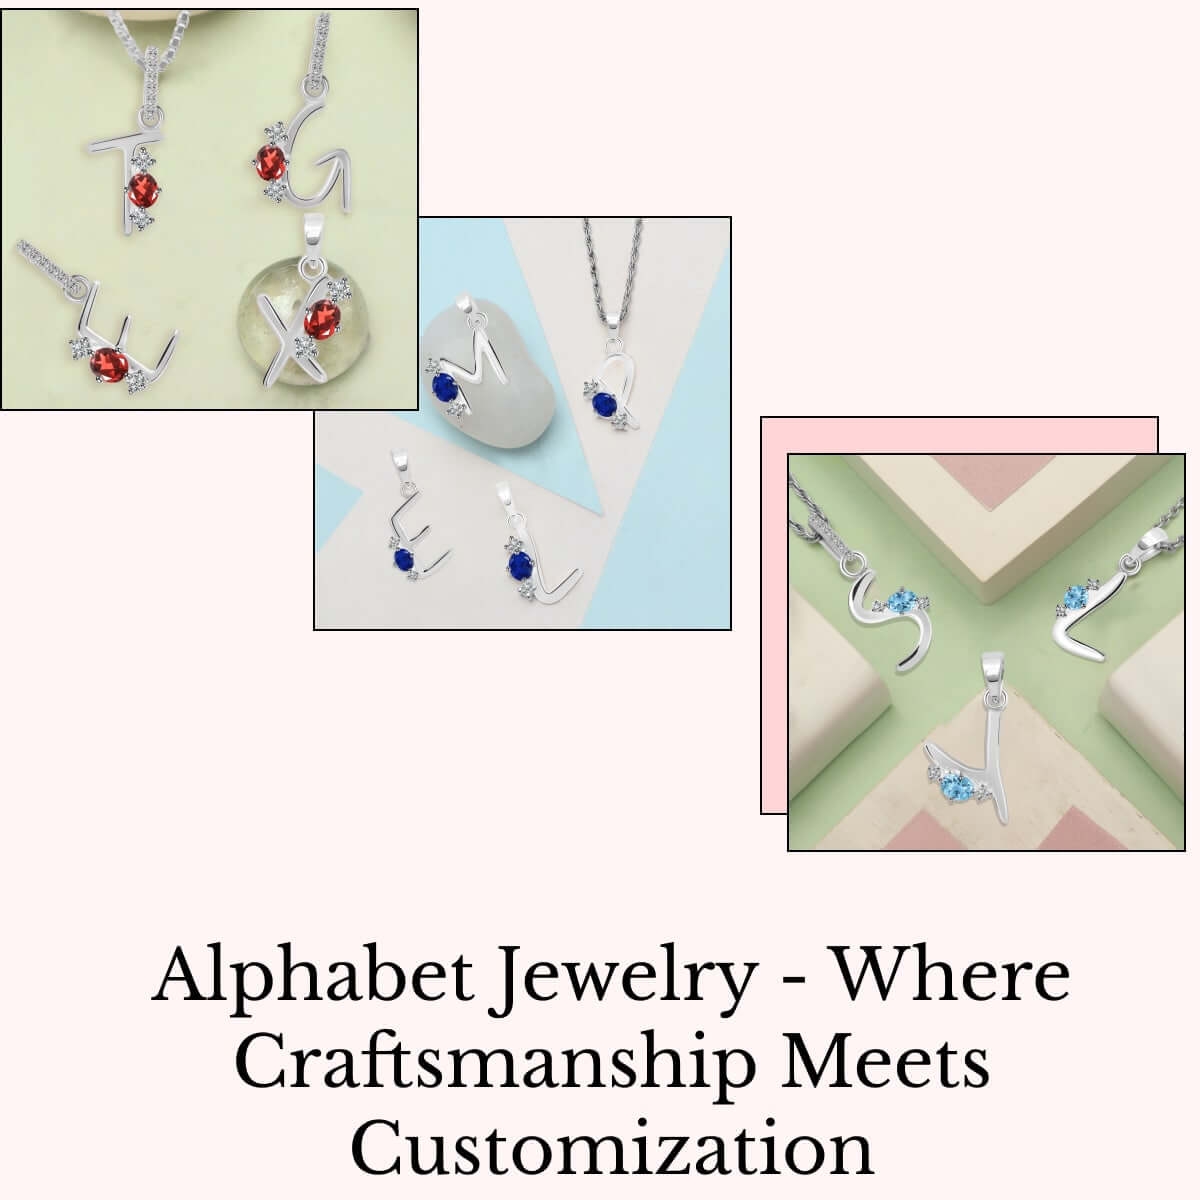 A Deep Dive into Creation and Craftsmanship of Customized Alphabet Jewelry